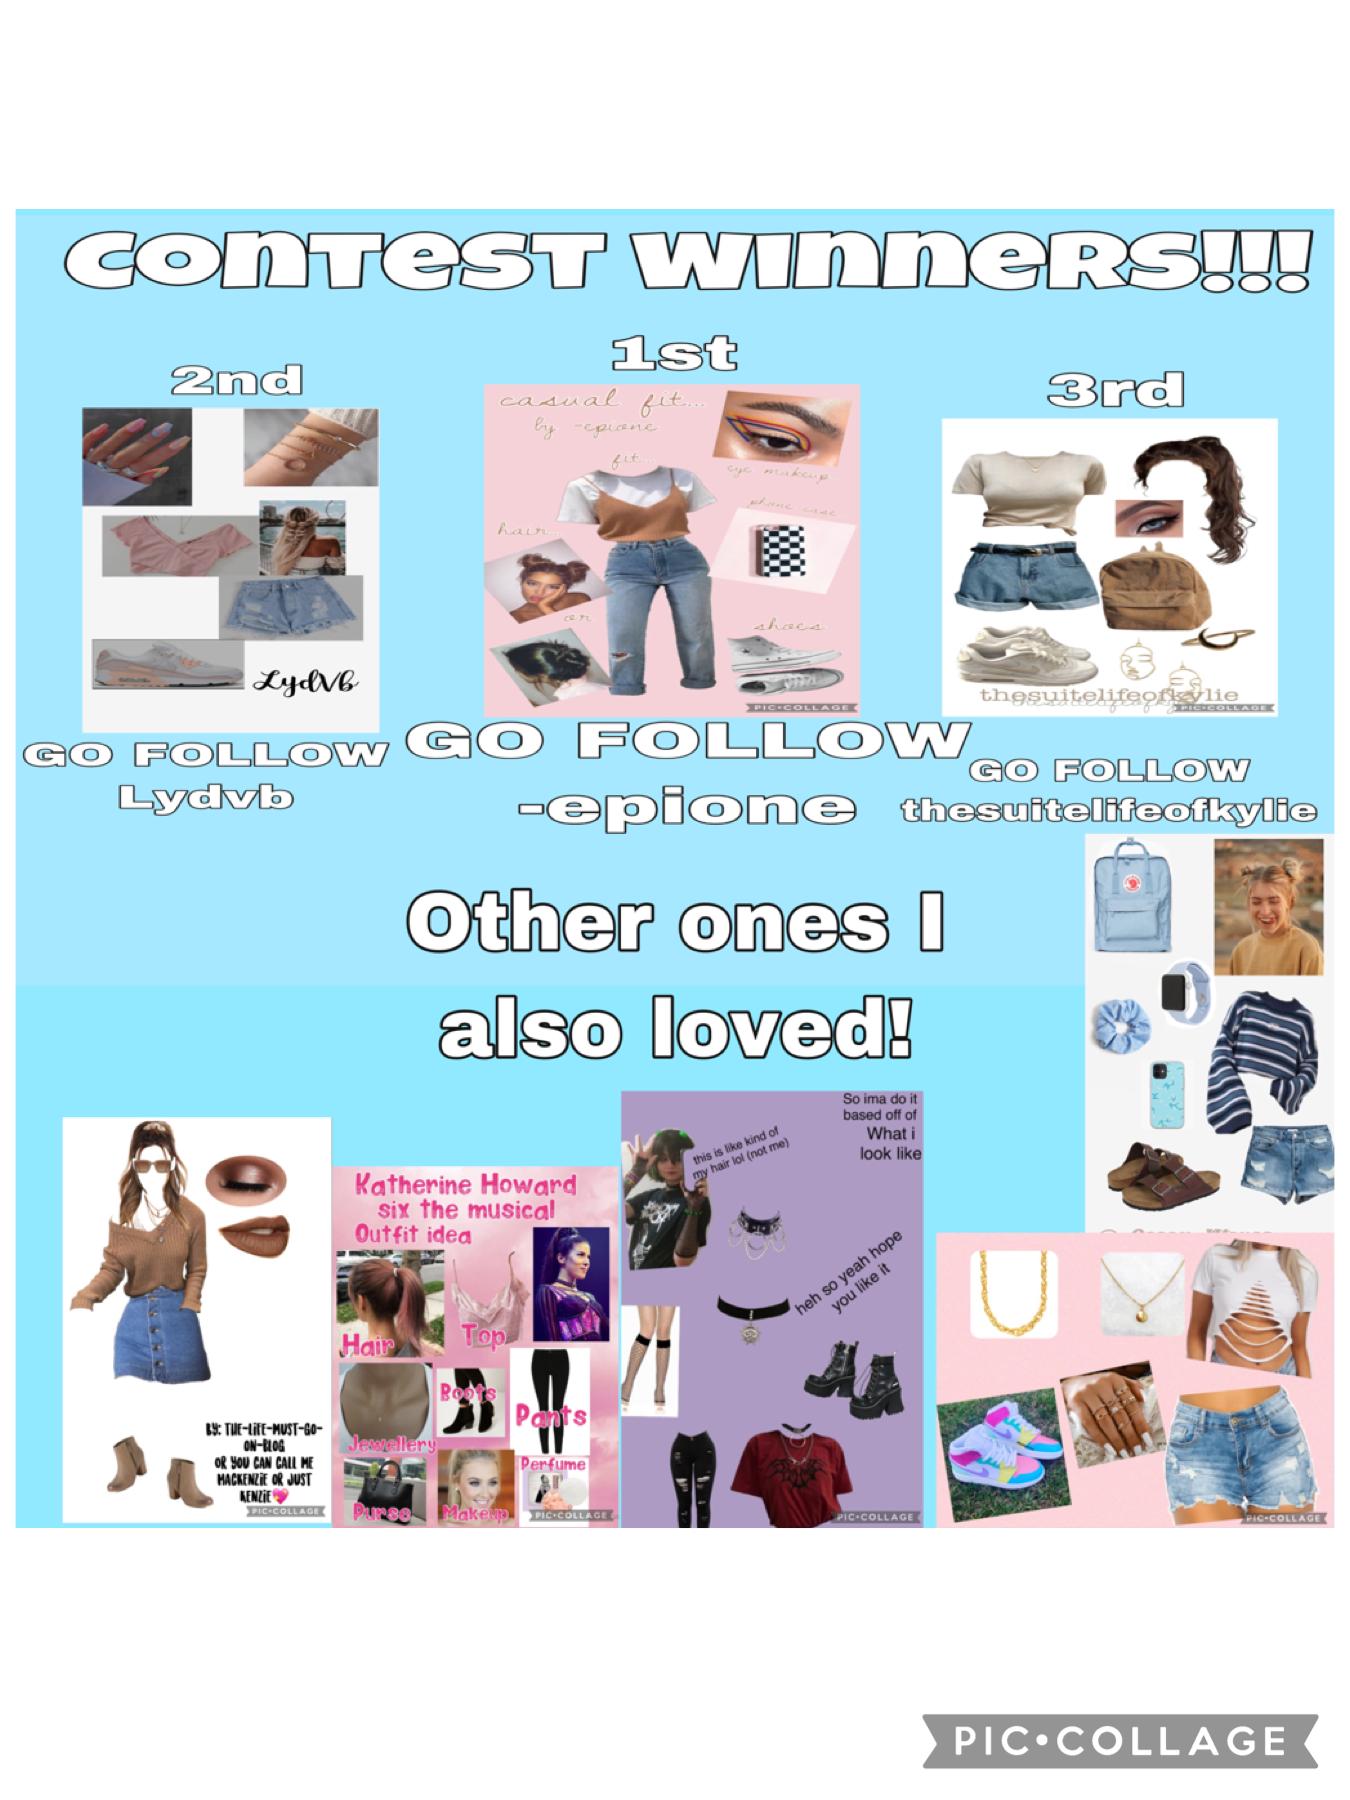 CONGRATS TO ALL THE CONTEST WINNERS YOU ALL DID WONDERUL!!!😁💙